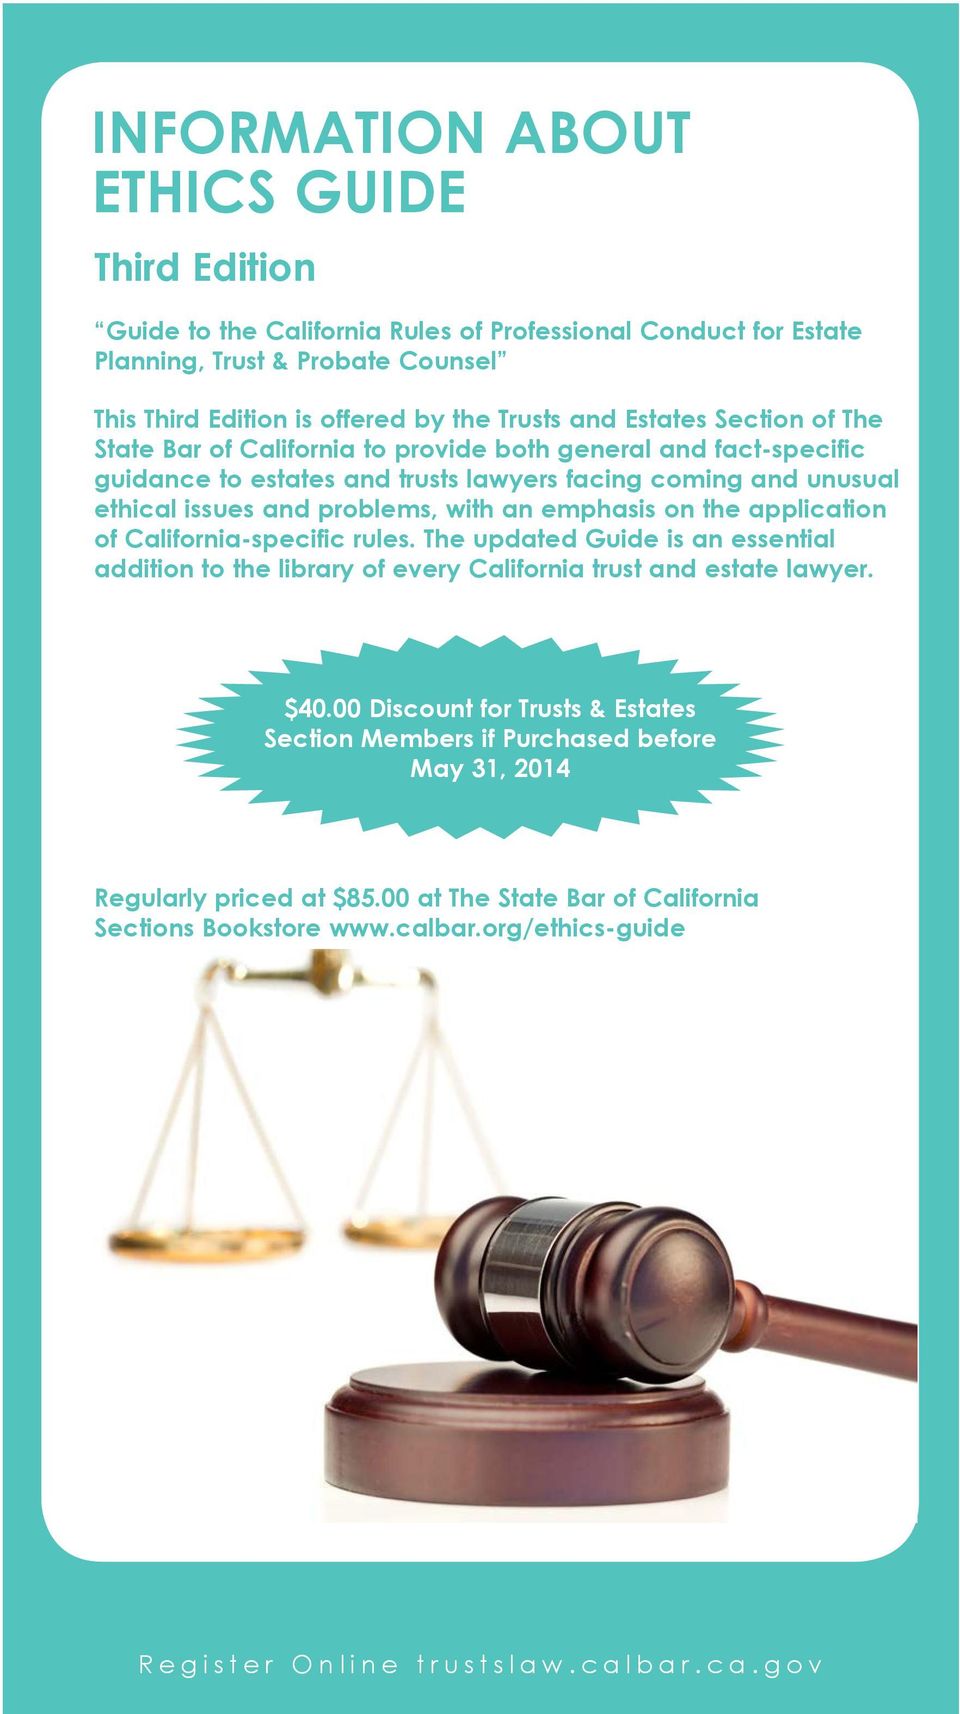 problems, with an emphasis on the application of California-specific rules. The updated Guide is an essential addition to the library of every California trust and estate lawyer. $40.